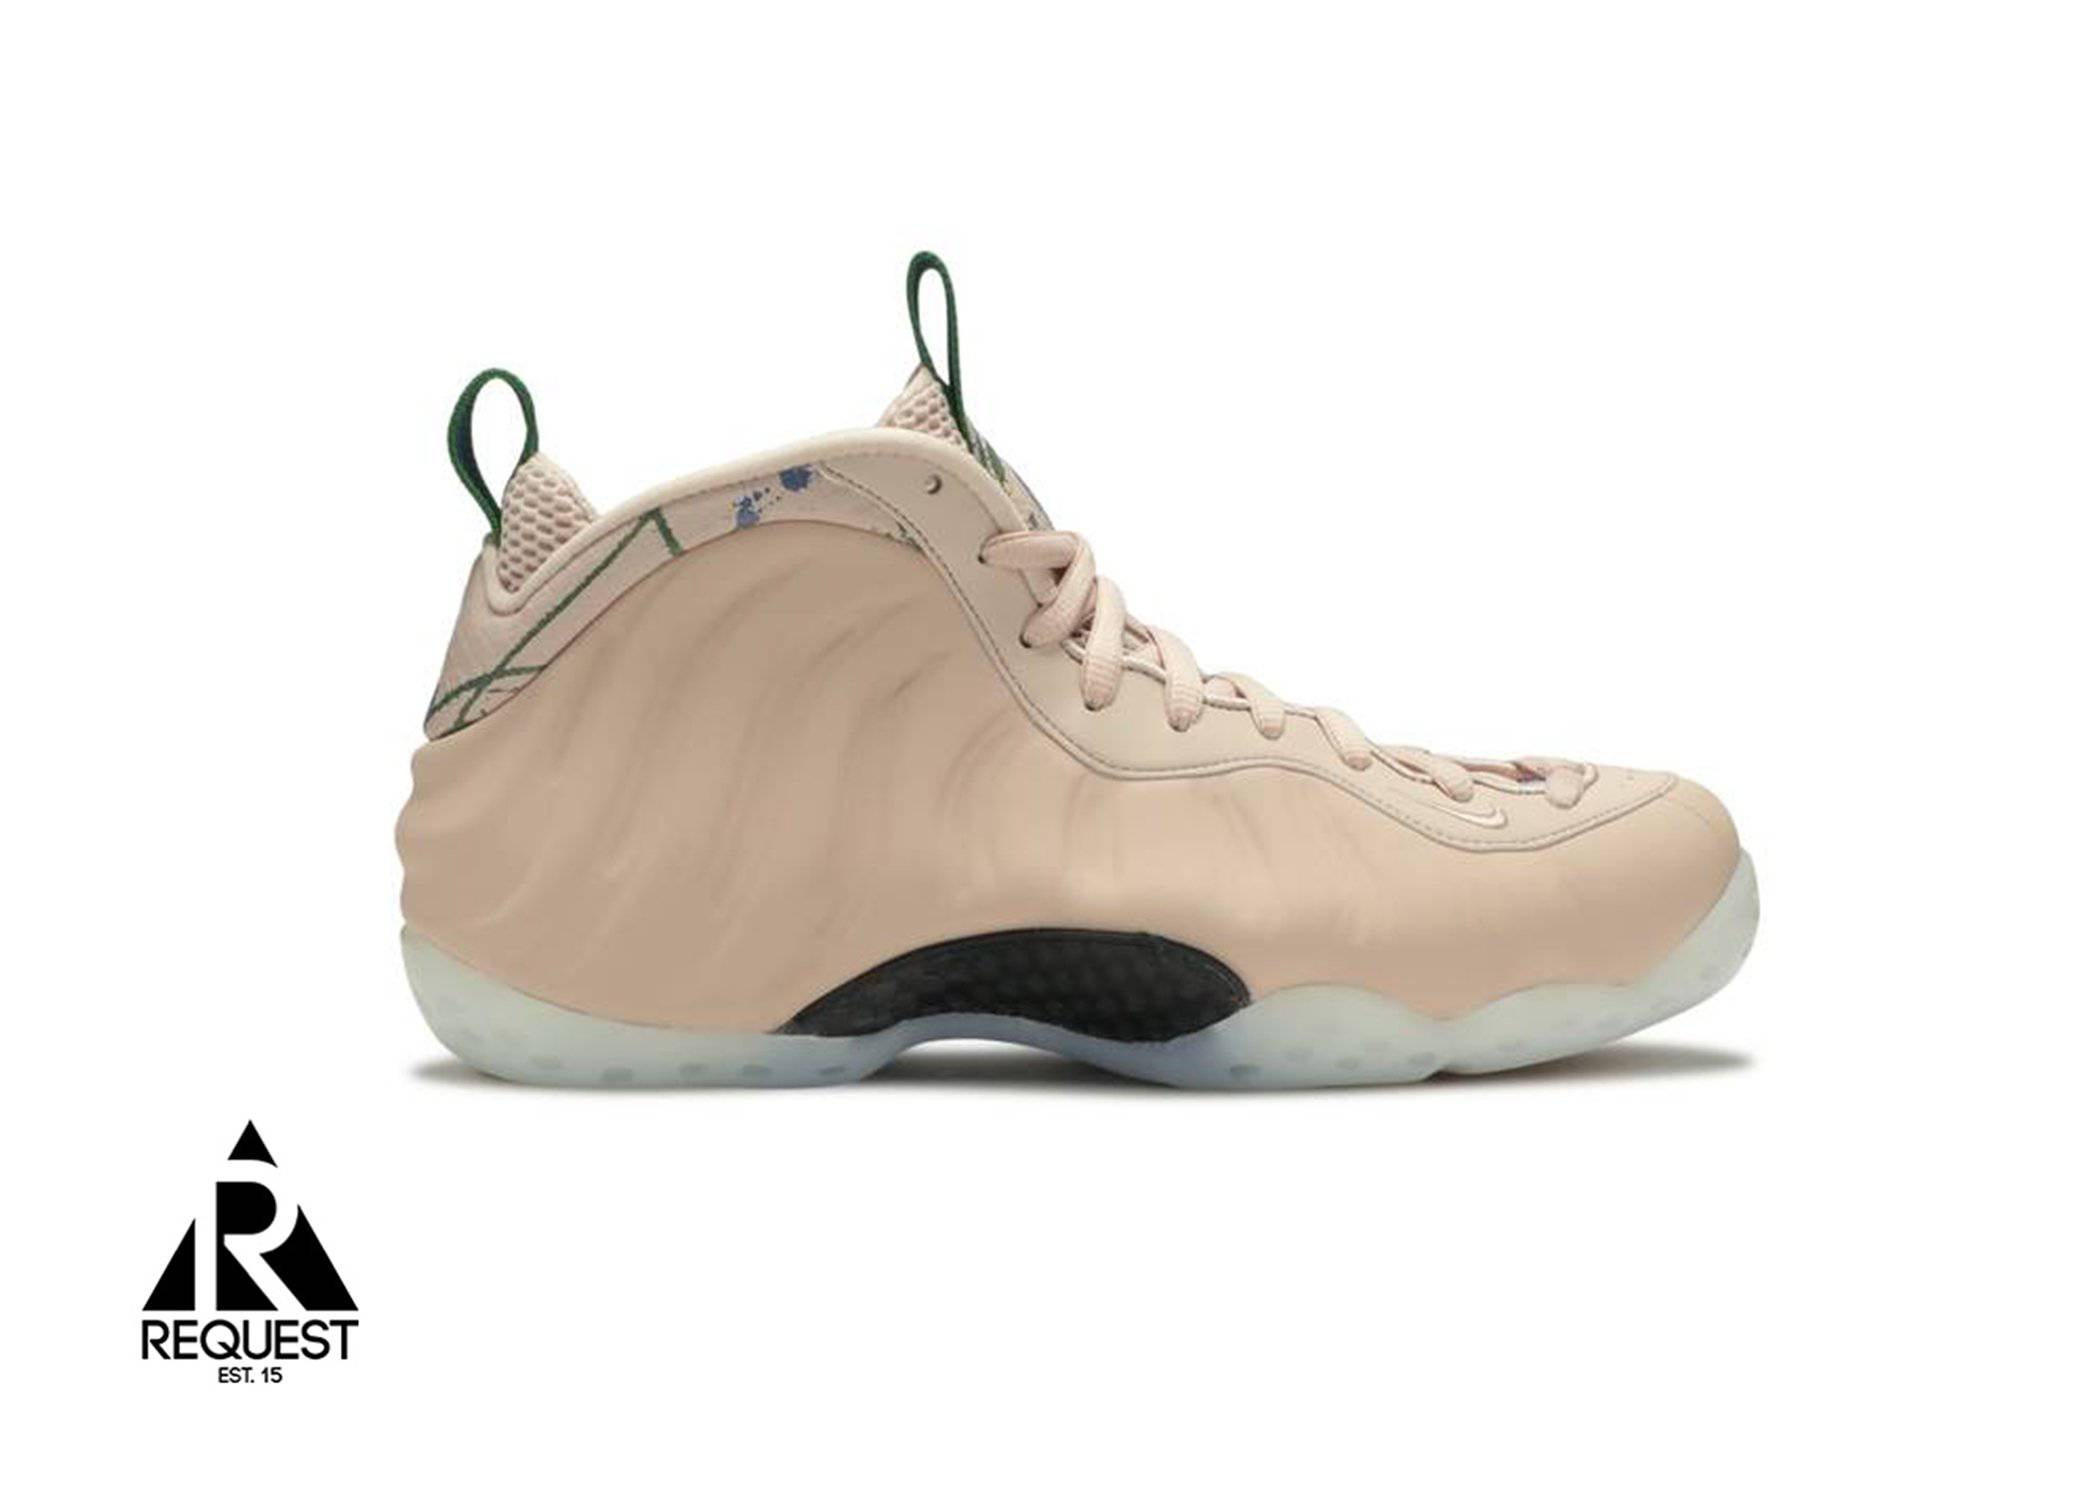 Nike Air Foamposite One “Particle Beige”